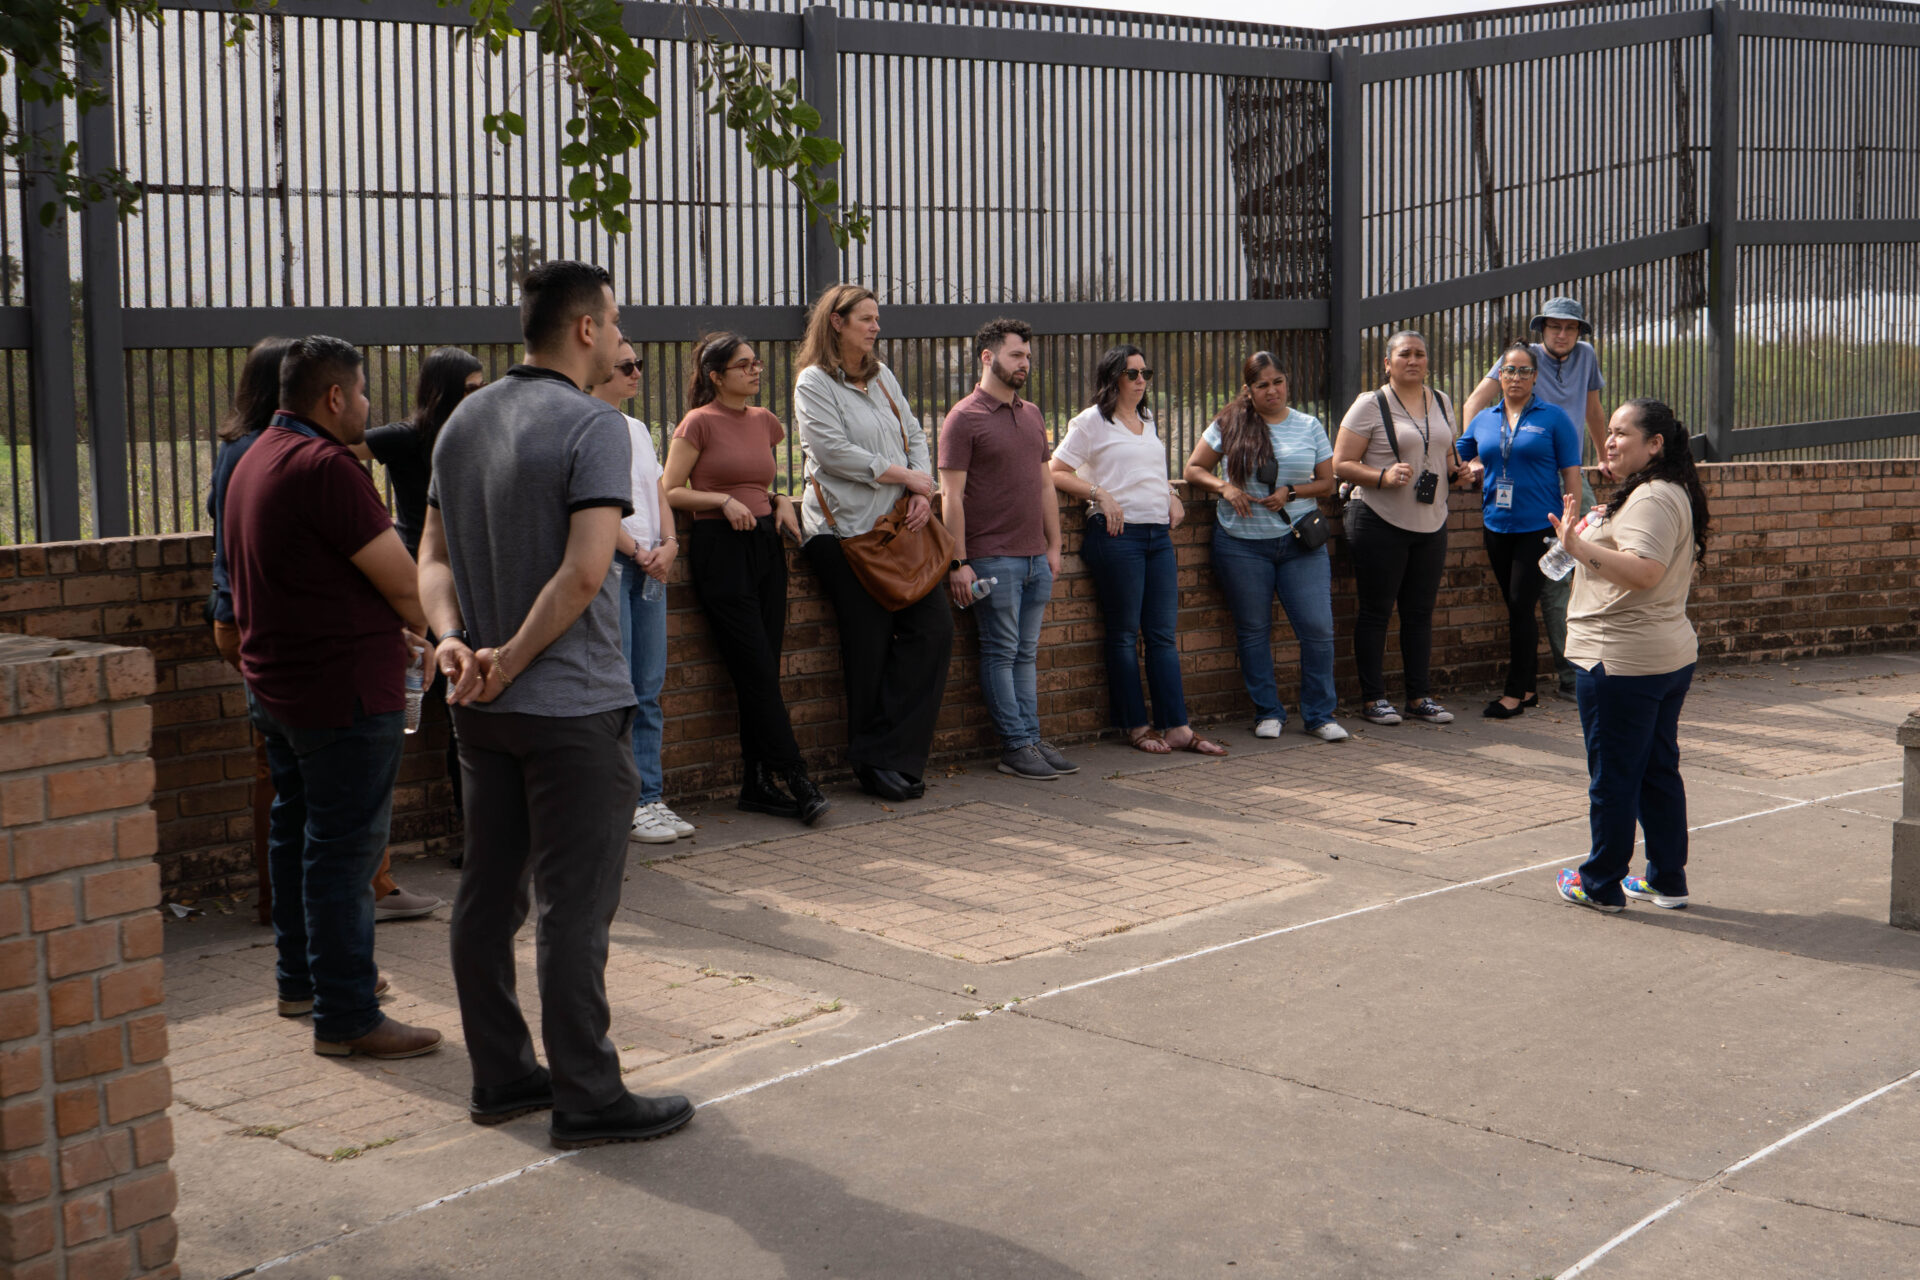 A group of law students listens intently to a presenter while on a tour of the border fence in Brownsville, Texas. The fence stands tall behind them.